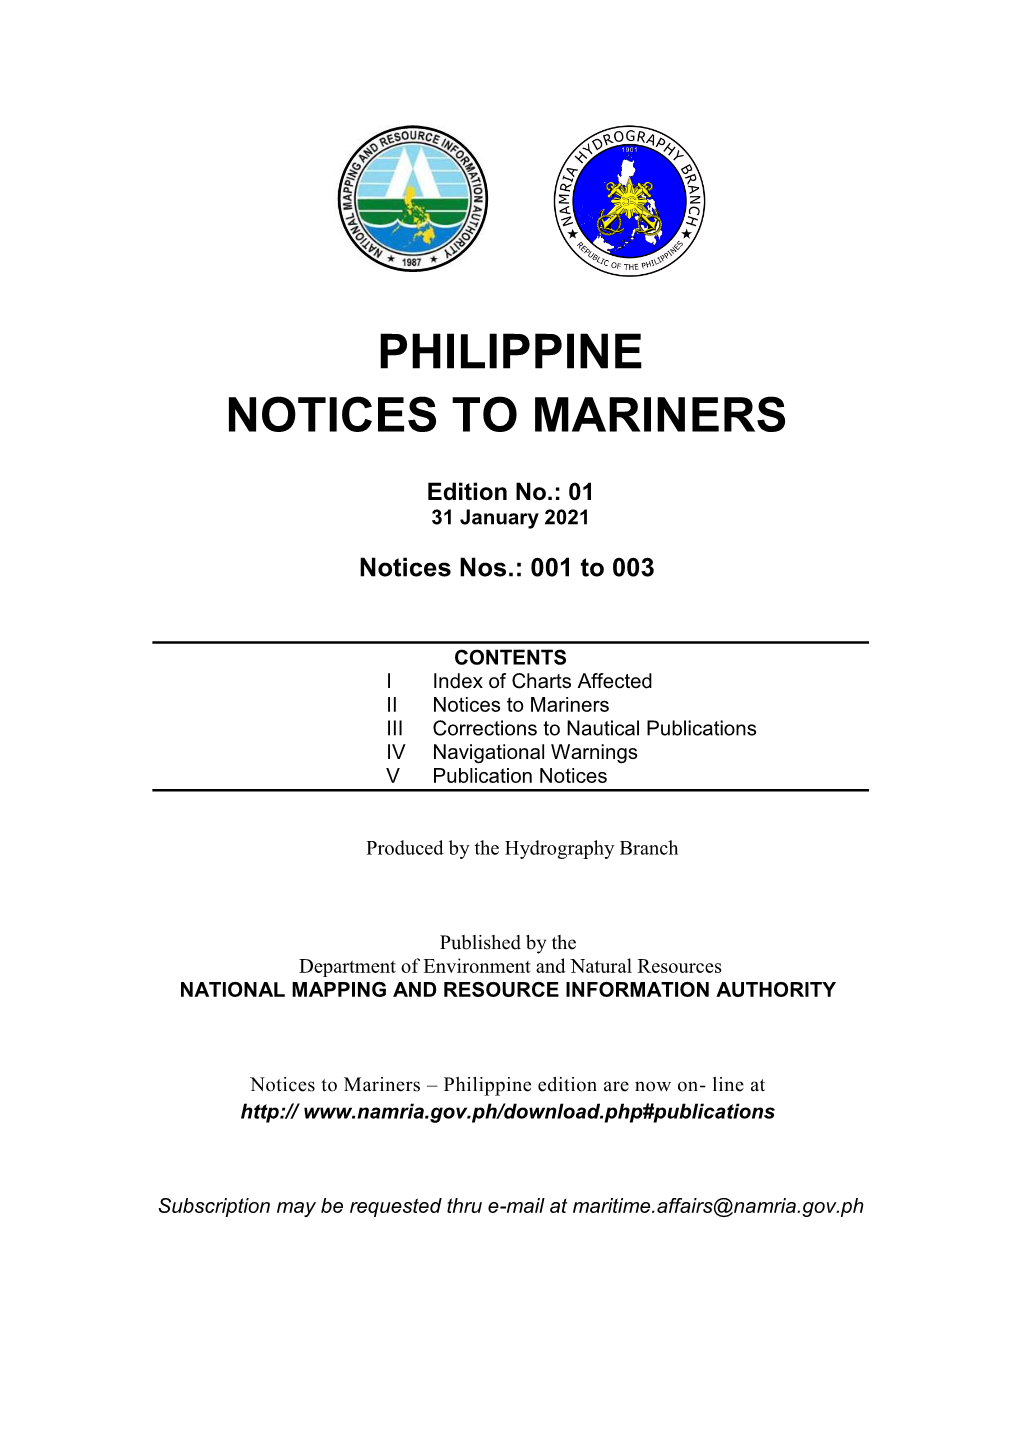 Philippine Notice to Mariners January 2021 Edition